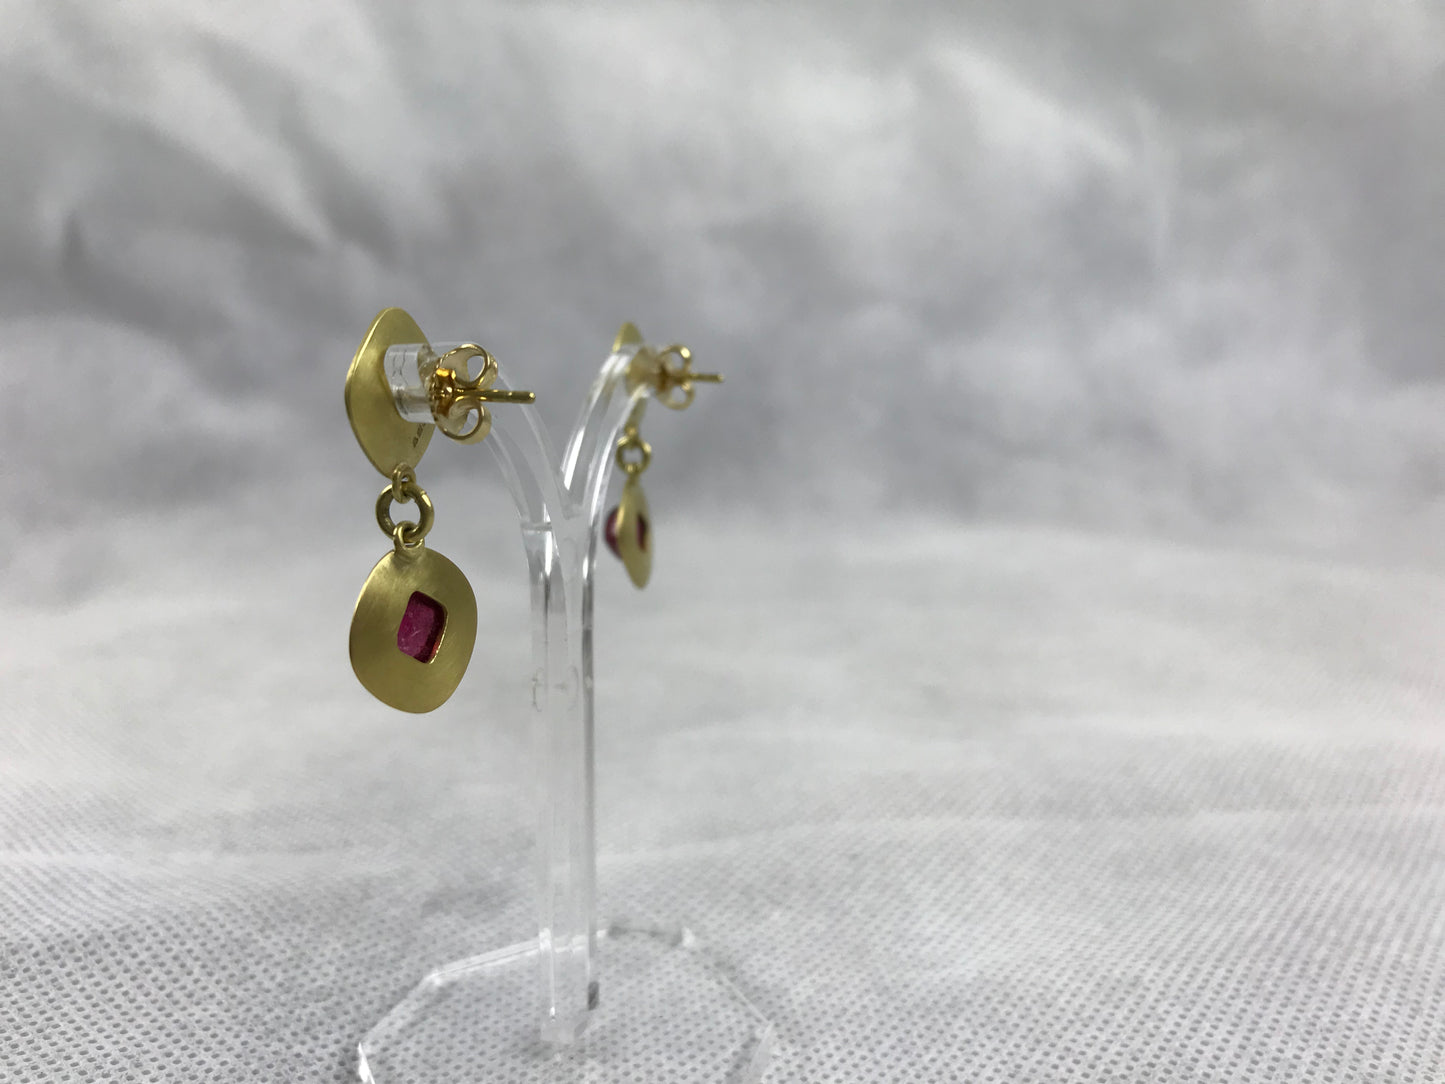 Scott-Moncrieff, Jean: Gold and pink tourmaline earrings